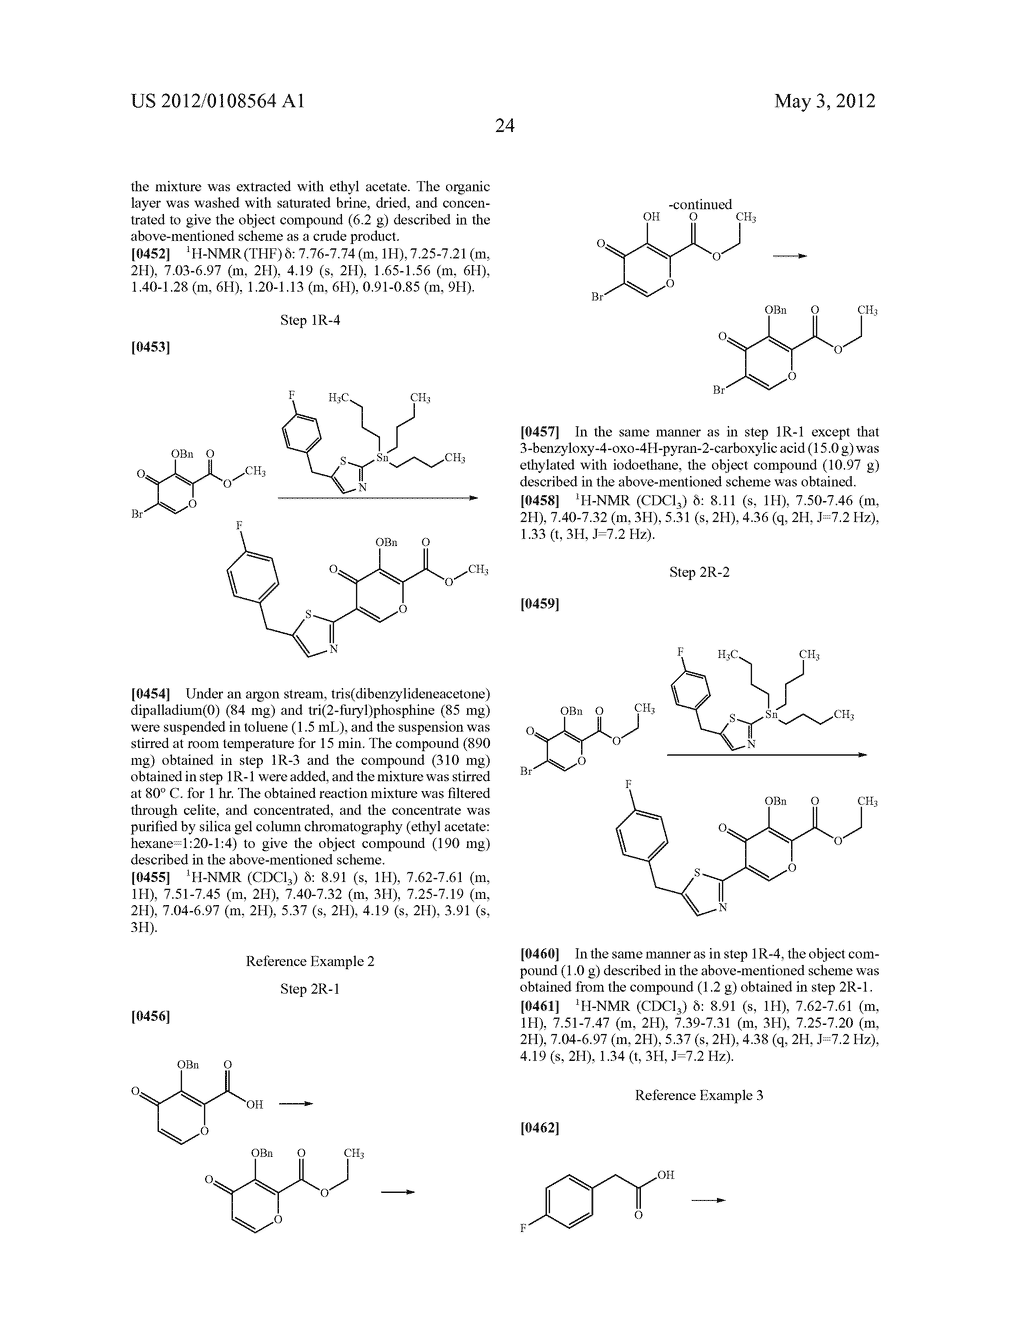 1,3,4,8-Tetrahydro-2H-Pyrido[1,2-a]Pyradine Derivatives and Use Thereof as     HIV Integrase Inhibitor - diagram, schematic, and image 25